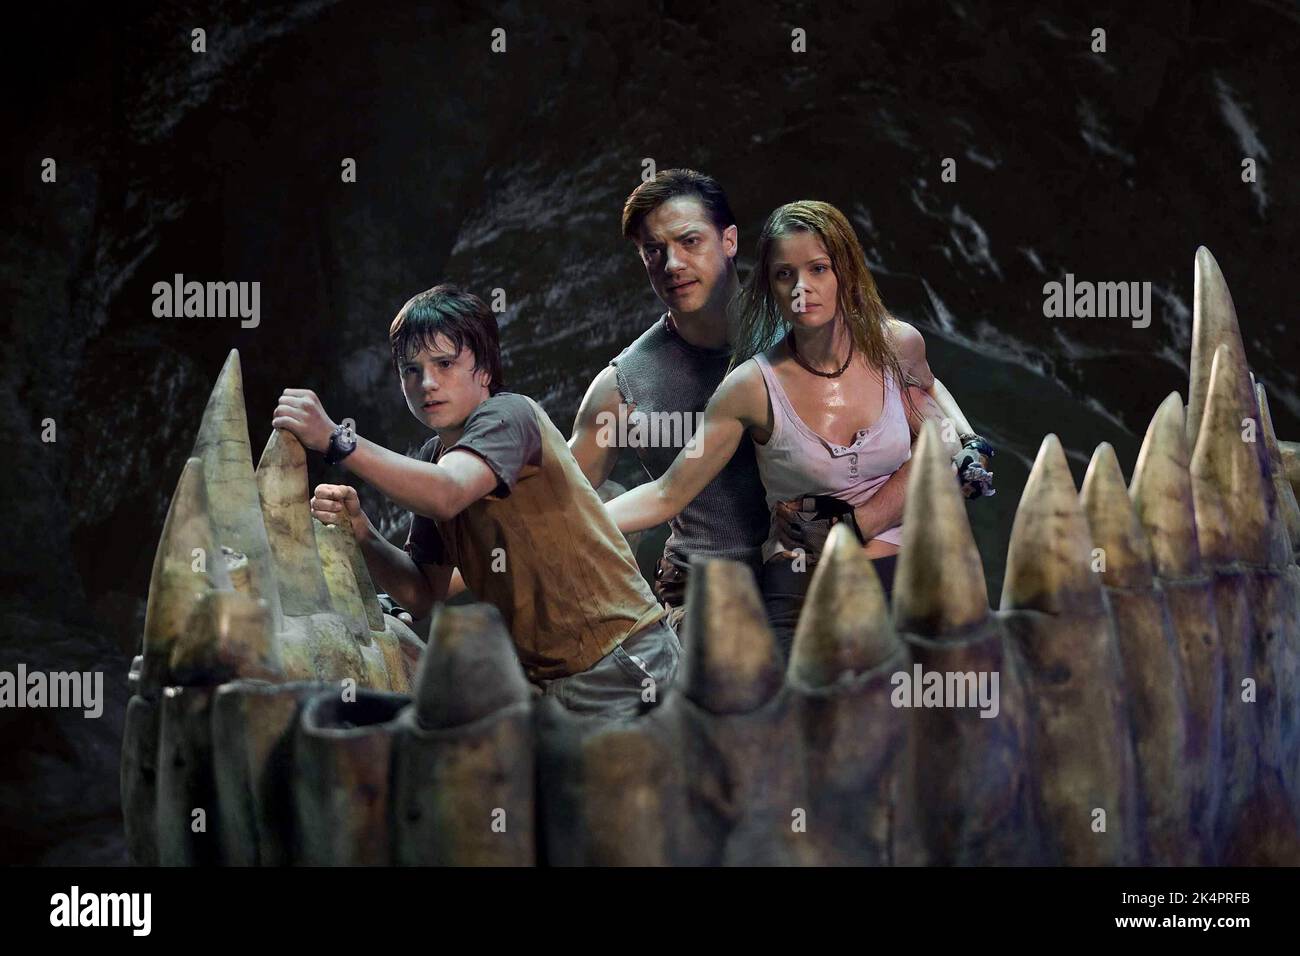 HUTCHERSON,FRASER,BRIEM, JOURNEY TO THE CENTER OF THE EARTH, 2008 Stock Photo